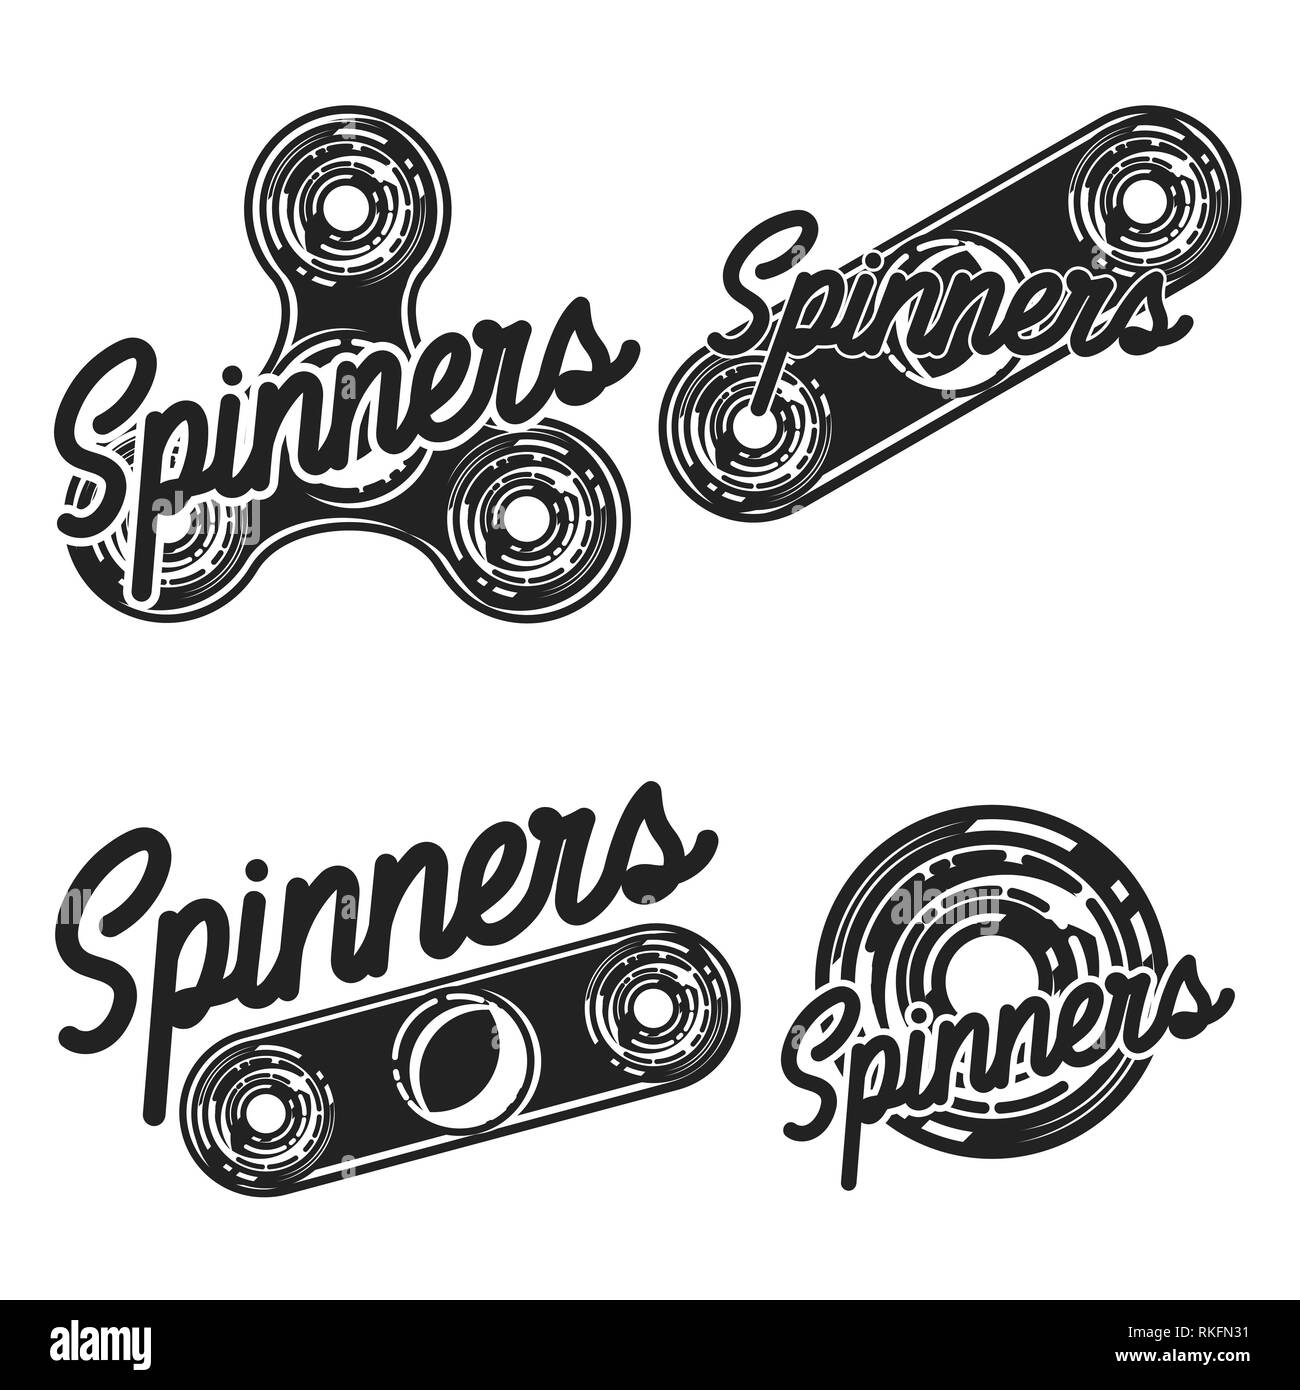 Set of vintage fidget spinners logos, emblems, badges and motivational posters. Monochrome Graphic Art. Vector Illustration. Stock Vector